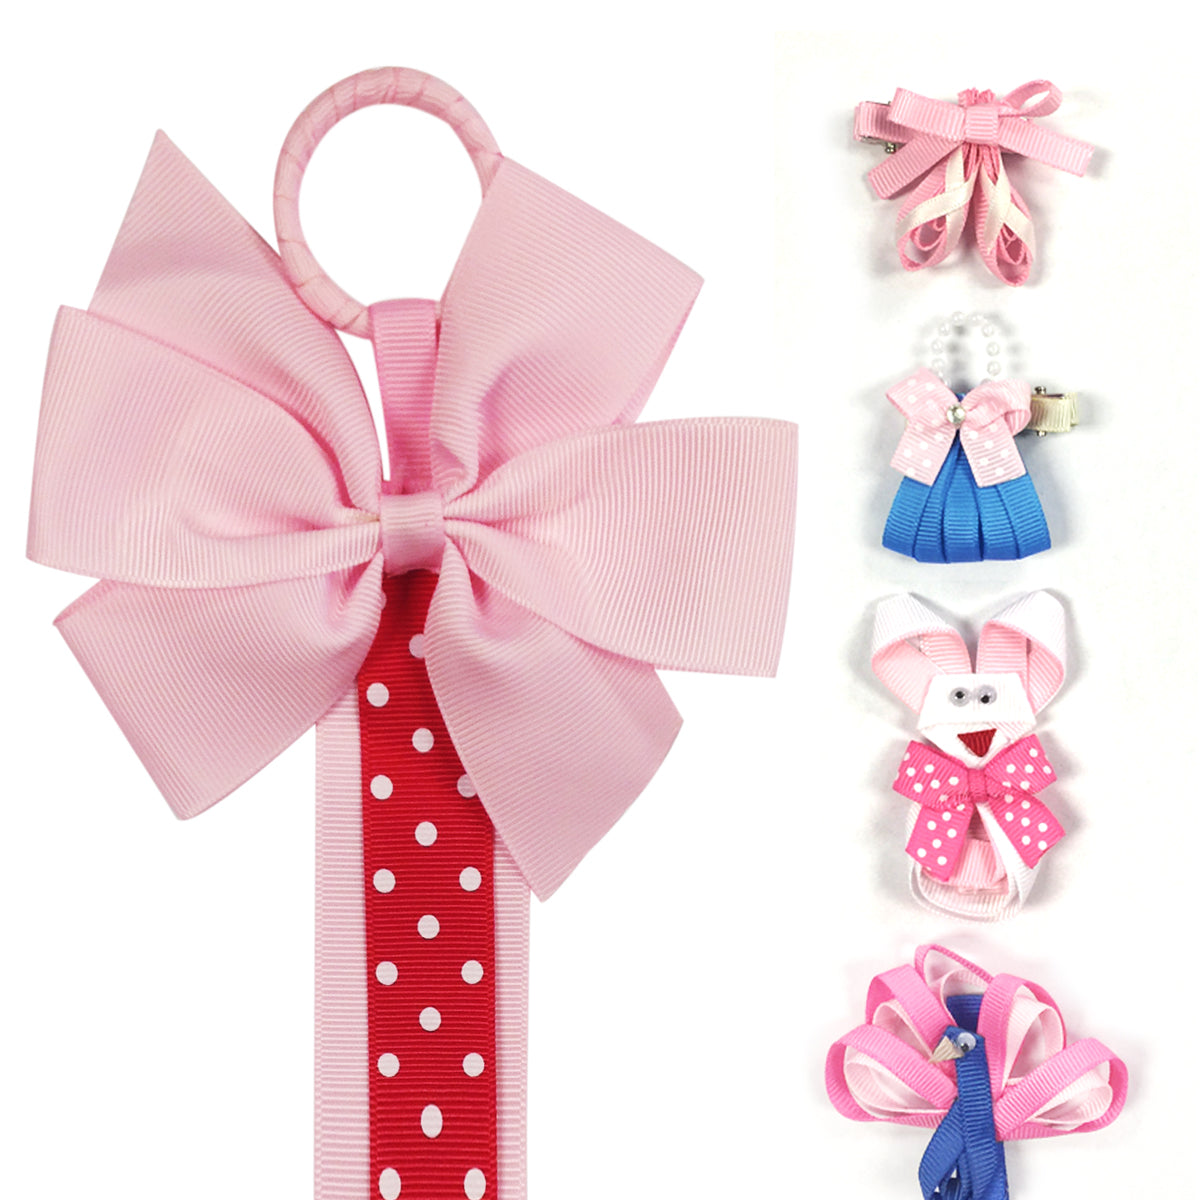 Wrapables Peacock, Bunny, Purse, Ballet Shoes Ribbon Sculpture Hair Clips with Polka Dots Hair Clip / Hair Bow Holder